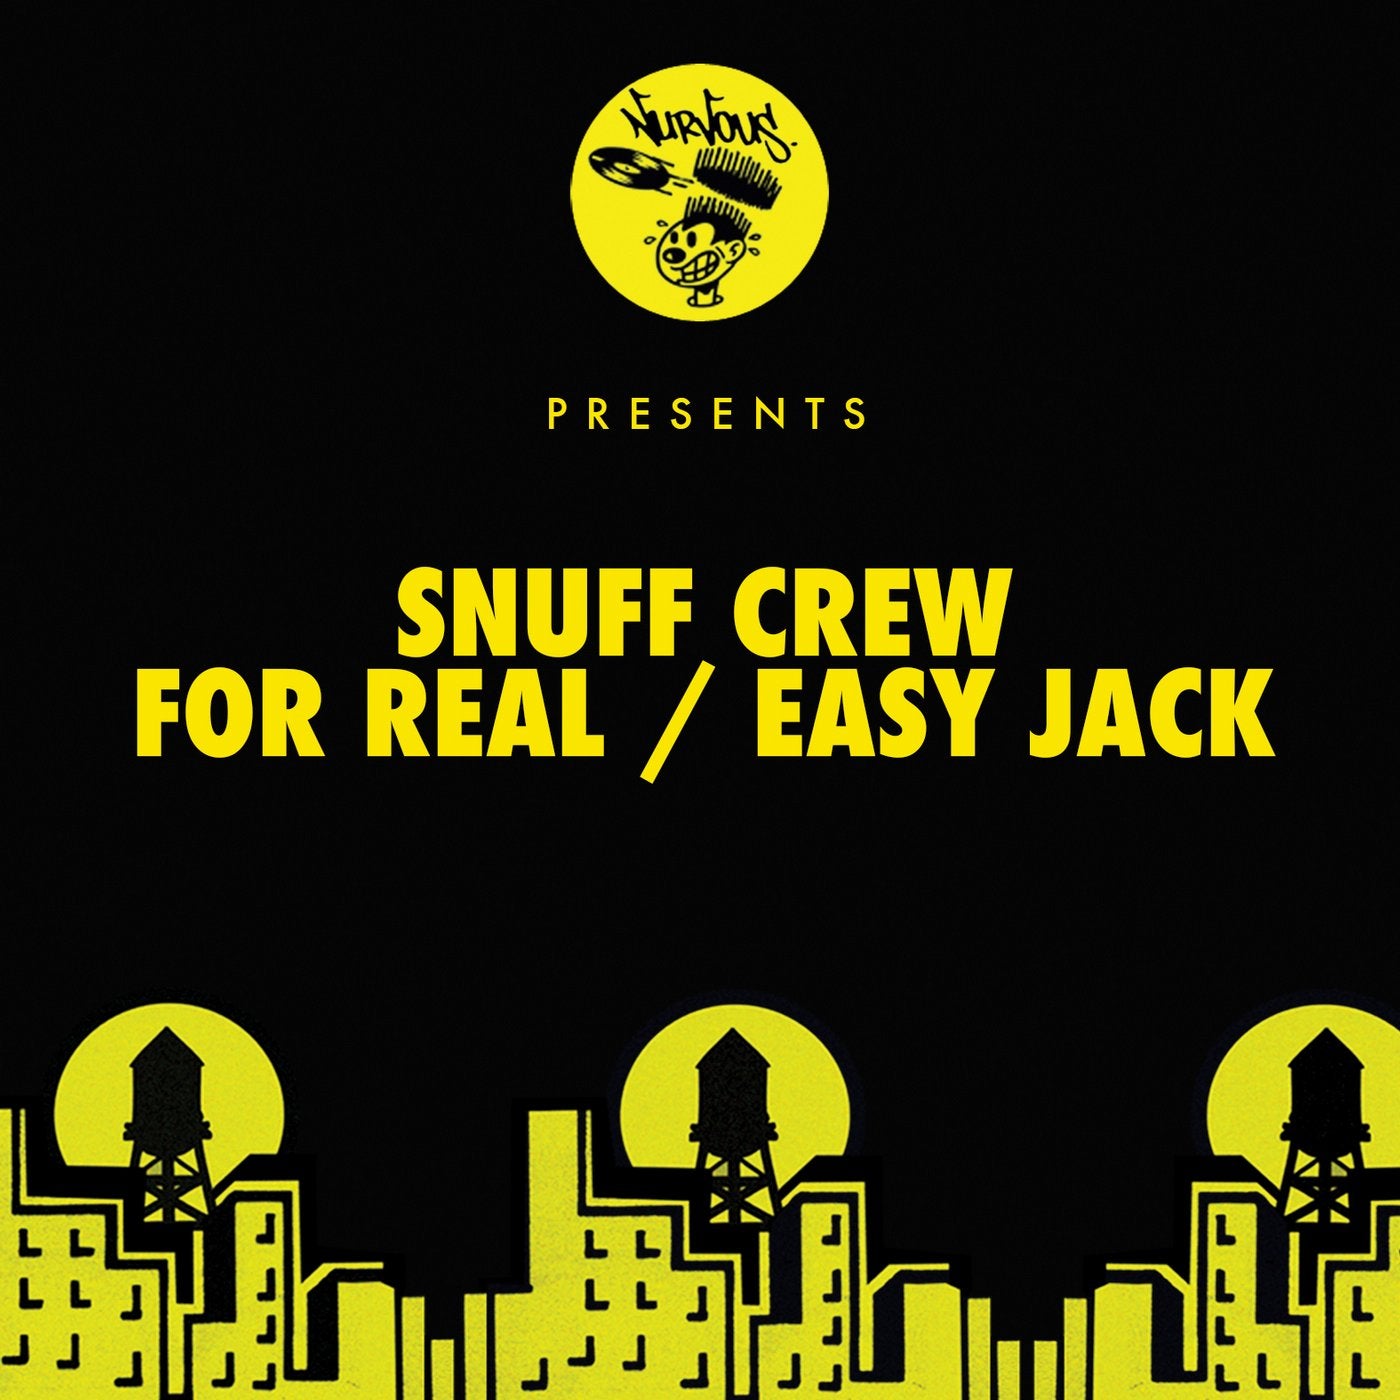 For Real / Easy Jack